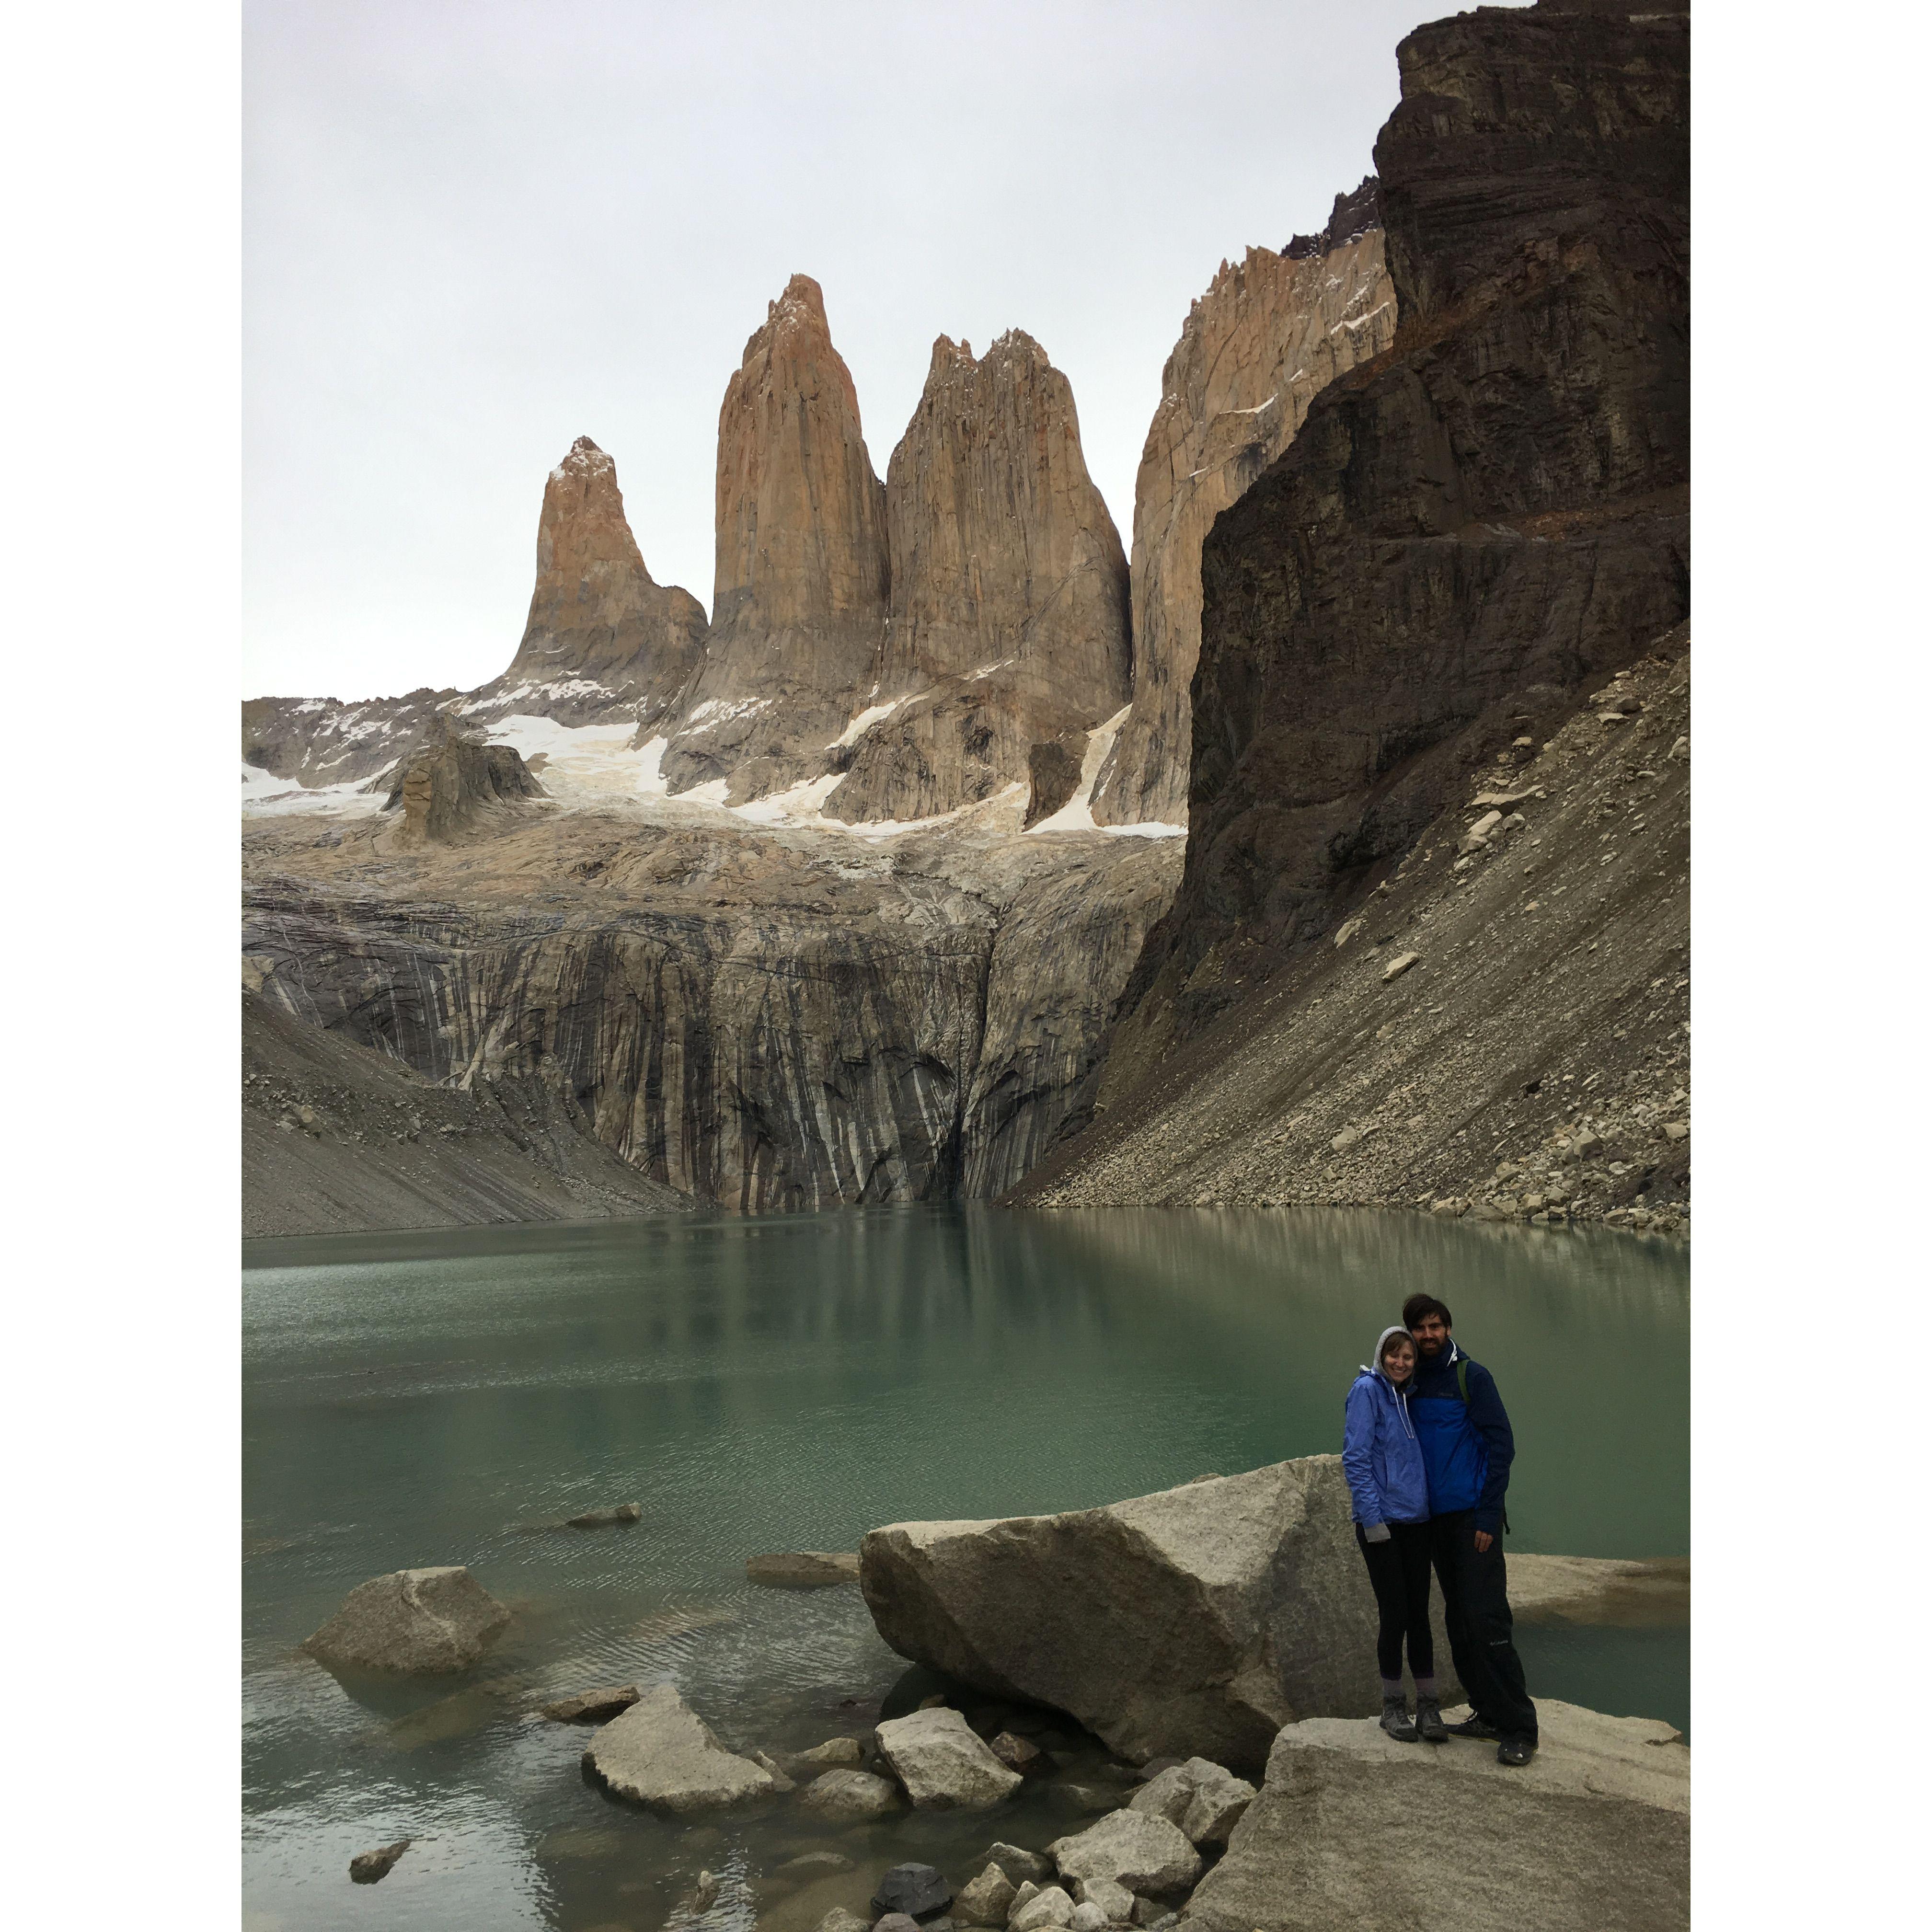 Torres del Paine, our first trip to Chile together!